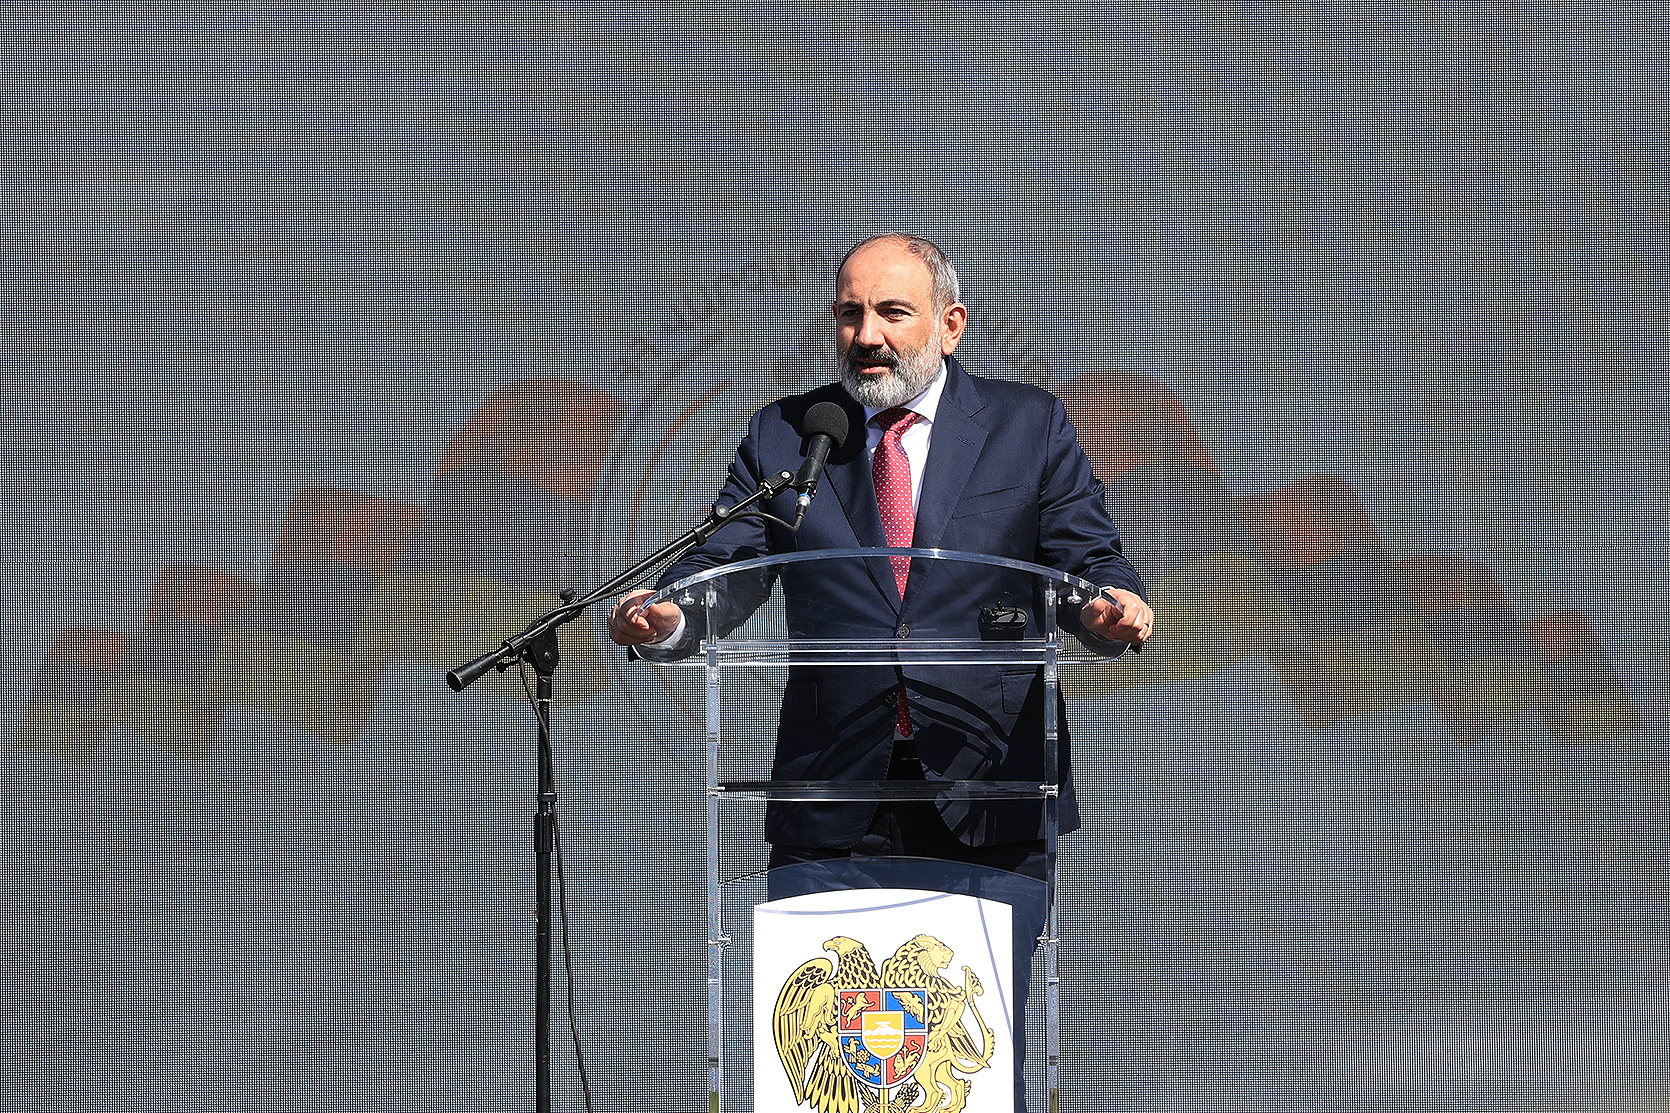 One of our goals is to promote healthy lifestyle, physical culture and sports. Nikol Pashinyan